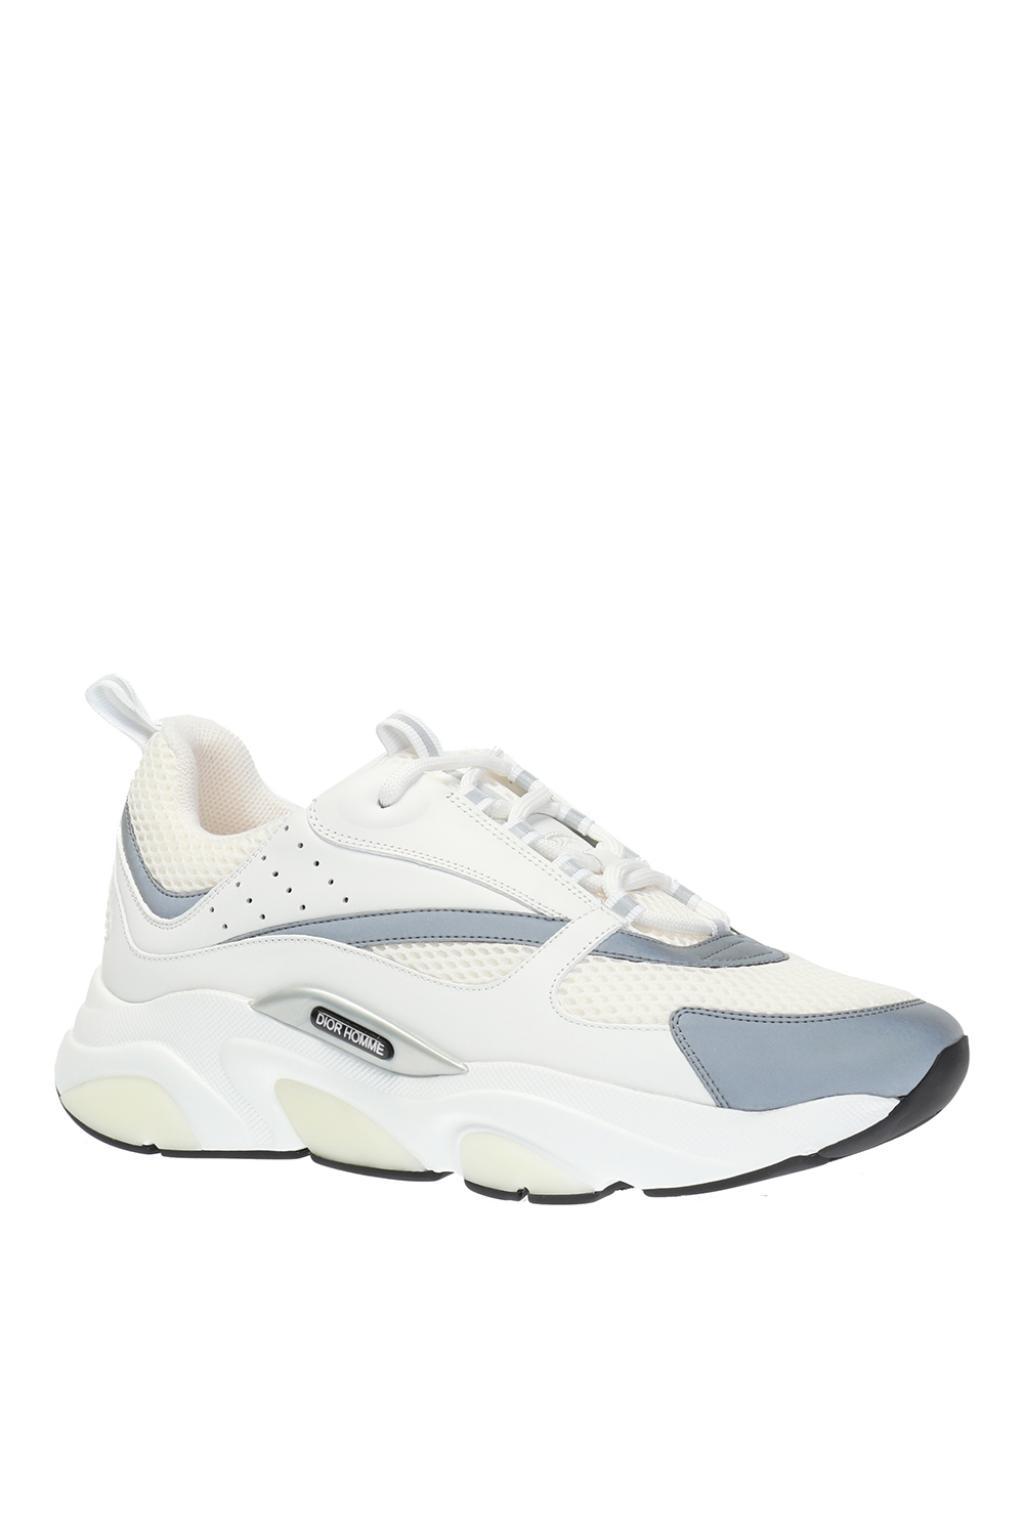 Dior Leather 'b22' Sneakers in White for Men - Lyst